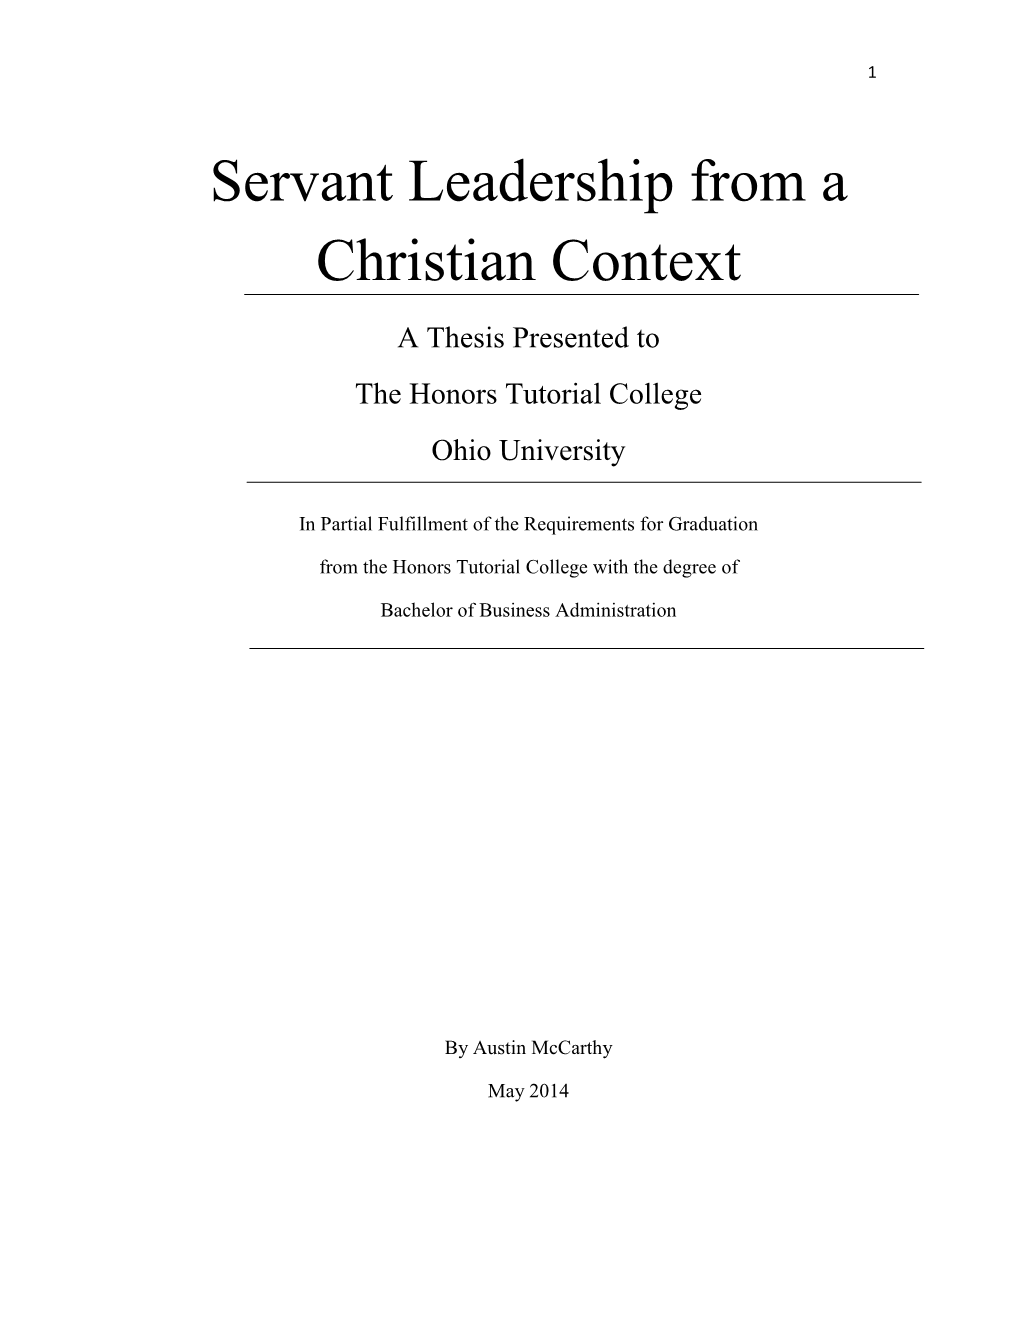 Servant Leadership from a Christian Context